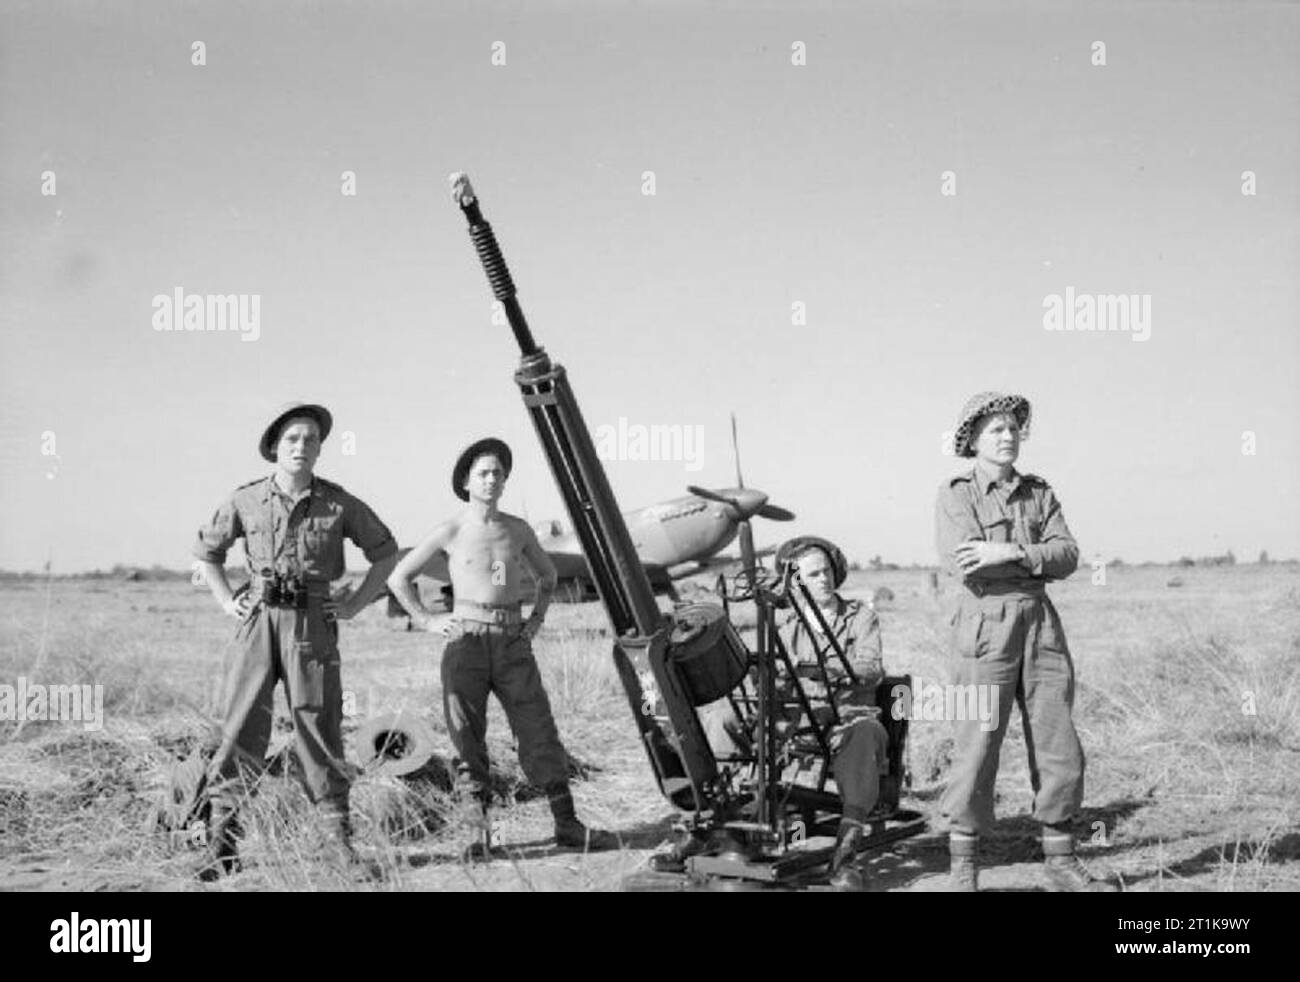 Royal Air Force Operations in the Far East, 1941-1945. The crew of a Light Anti-Aircraft Squadron of the RAF Regiment man their 20mm Hispano LAA gun at Tabingaung, Burma. They are, (left to right): Corporal J E Law of Edinburgh Leading Aircraftmen D G Cooper of Croydon F W Woods of Bury St Edmunds E Ellis of Leeds Behind them is parked a Supermarine Spitfire Mark VIII of No. 155 Squadron RAF. Stock Photo